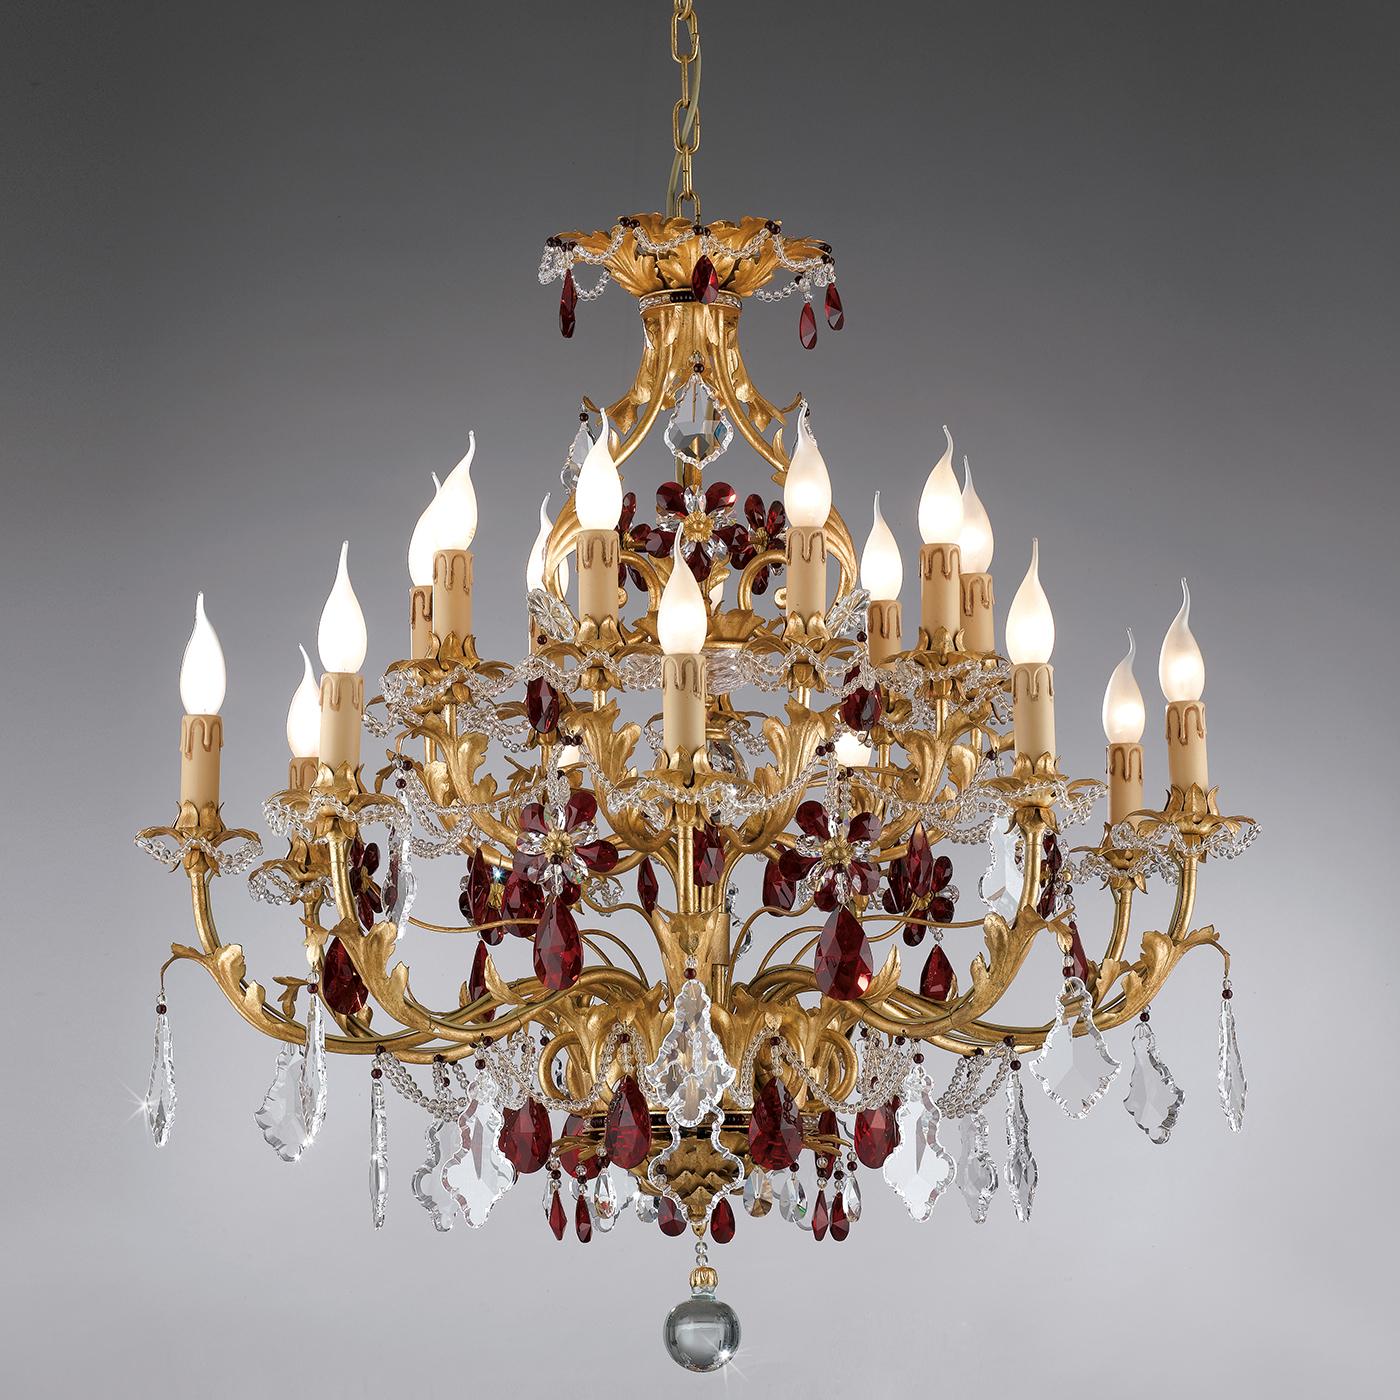 The embodiment of unabashed opulence, this chandelier makes a strong style statement. Inspired by centuries of Italian design and know-how, the chandelier is comprised of two tiers, each with nine arms. Coated with an aged gold leaf finish, the